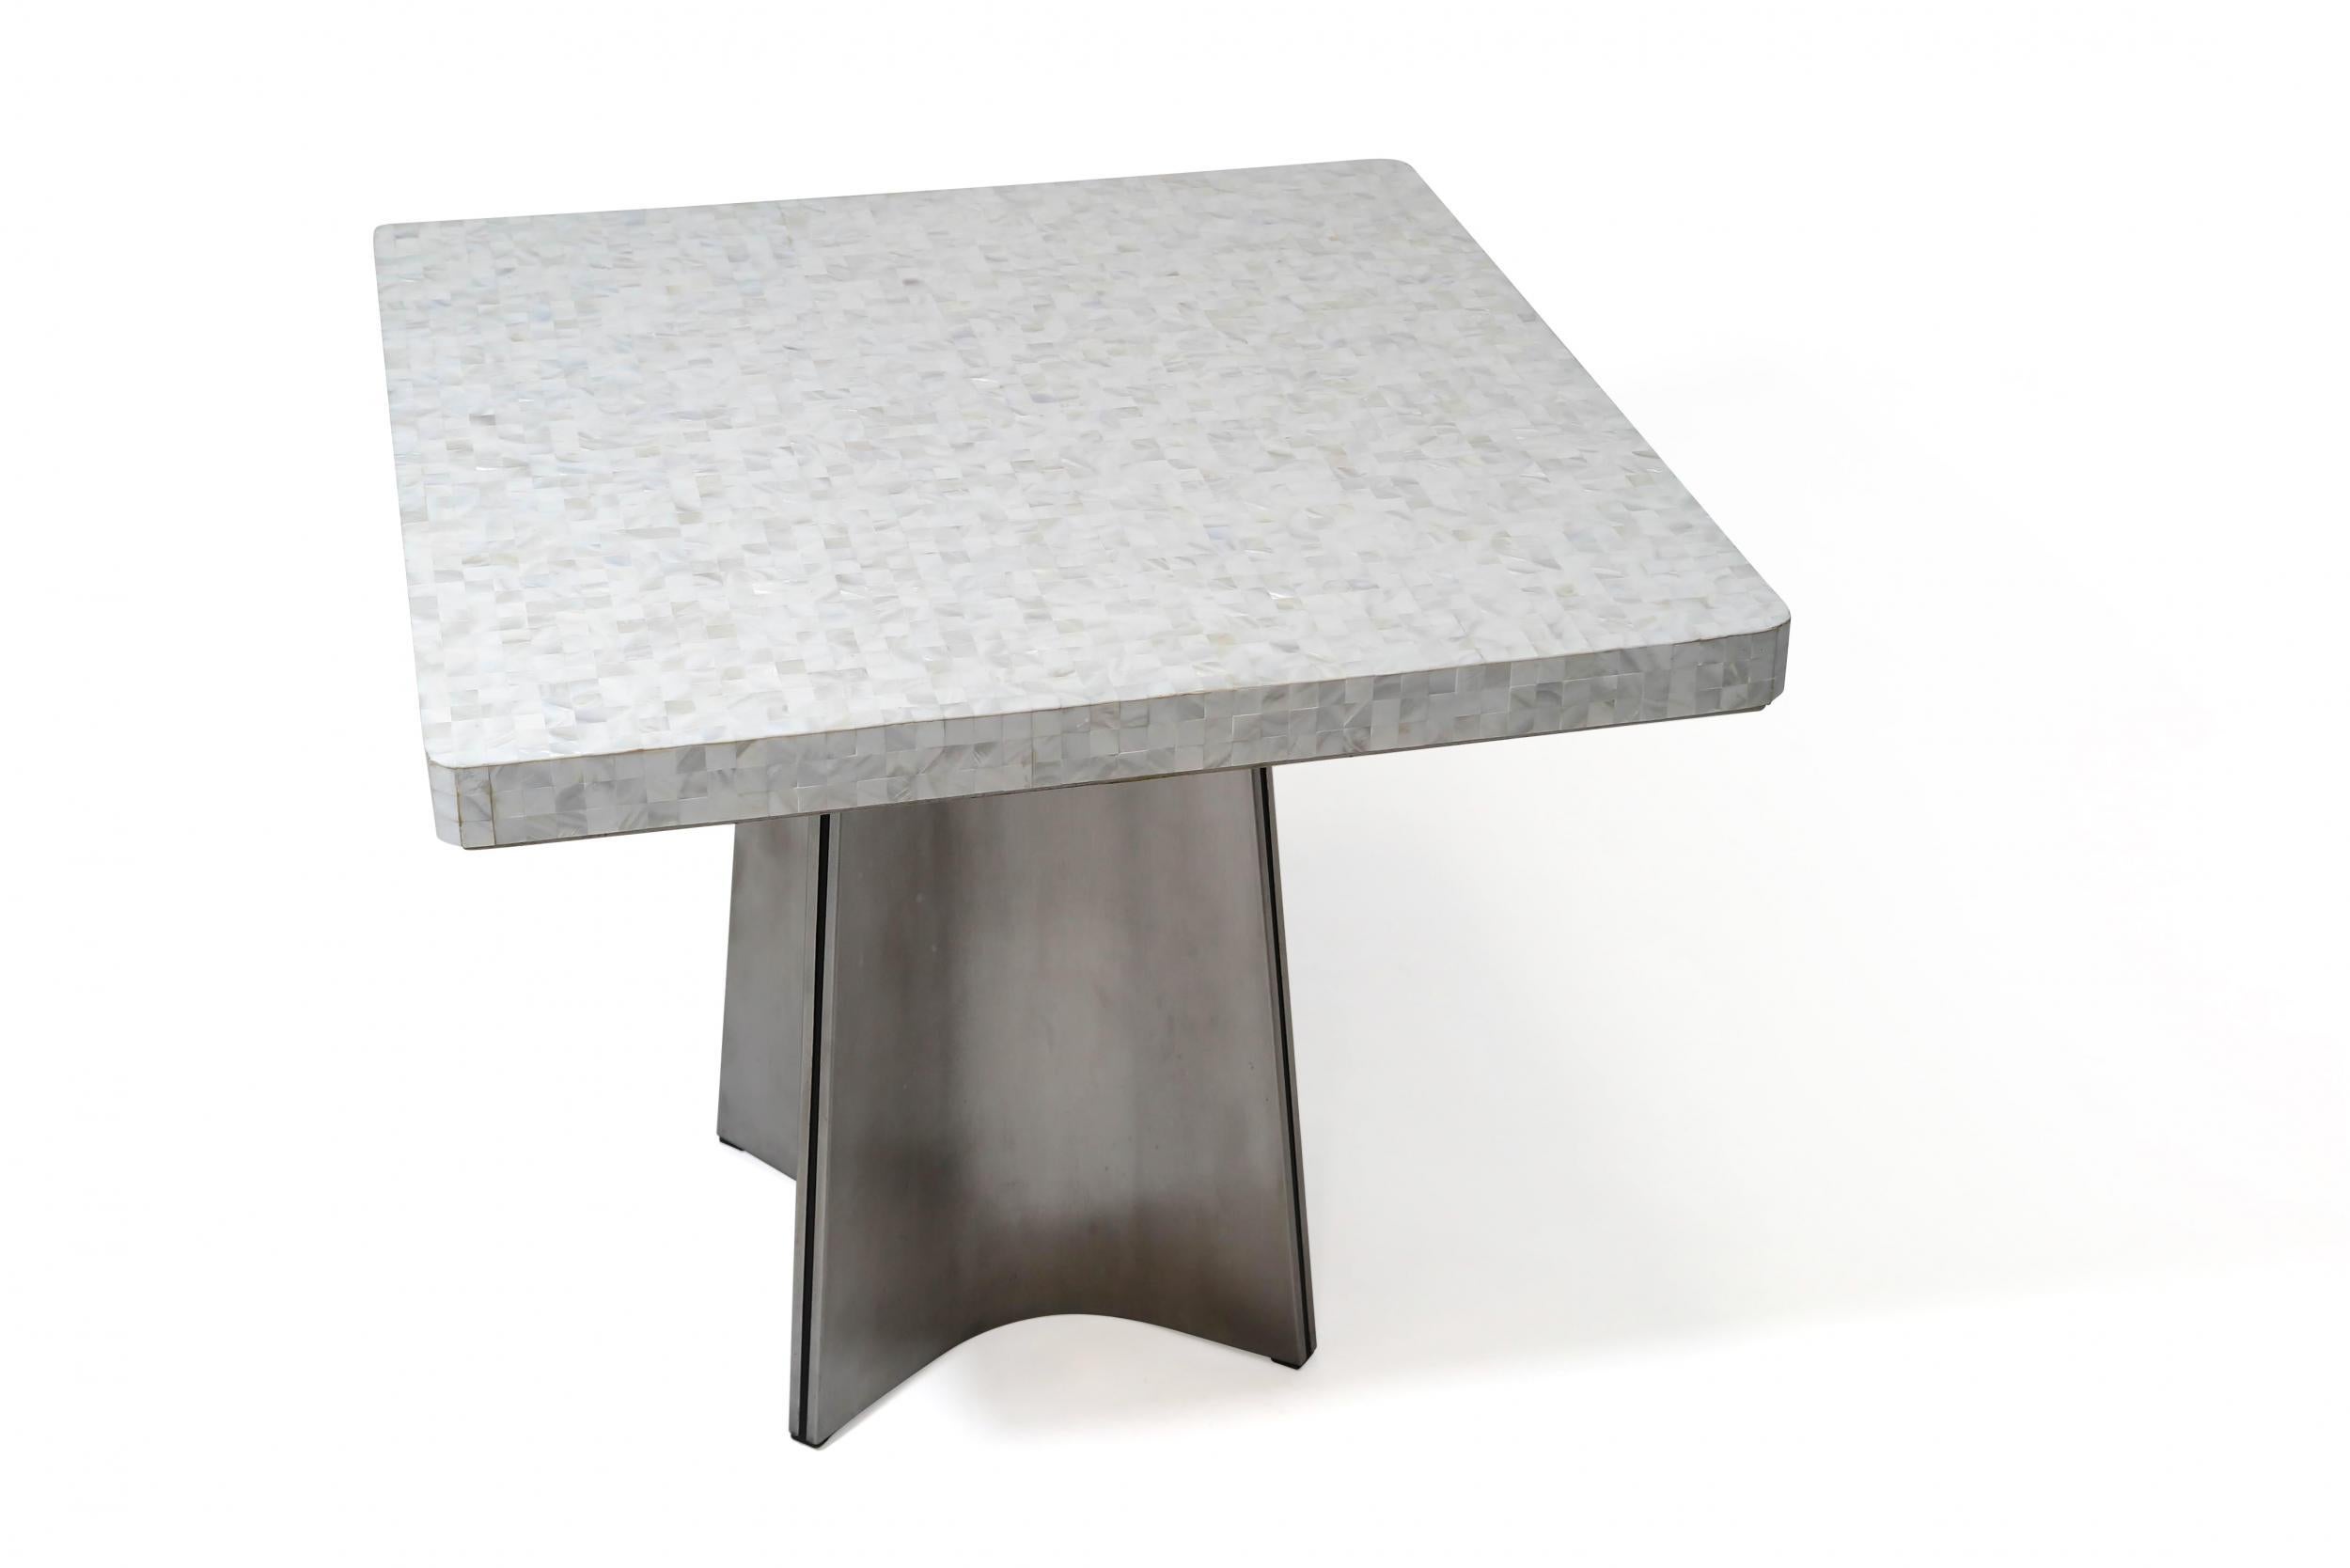 Square dining table designed by Luiggi Saccardo for Arremet, circa 1973. Italy. Aluminum star base with mother of pearl top surface. Good condition with minor signs of age and use, some marks on base. The table has a Luigi Saccardo stamp on the base.